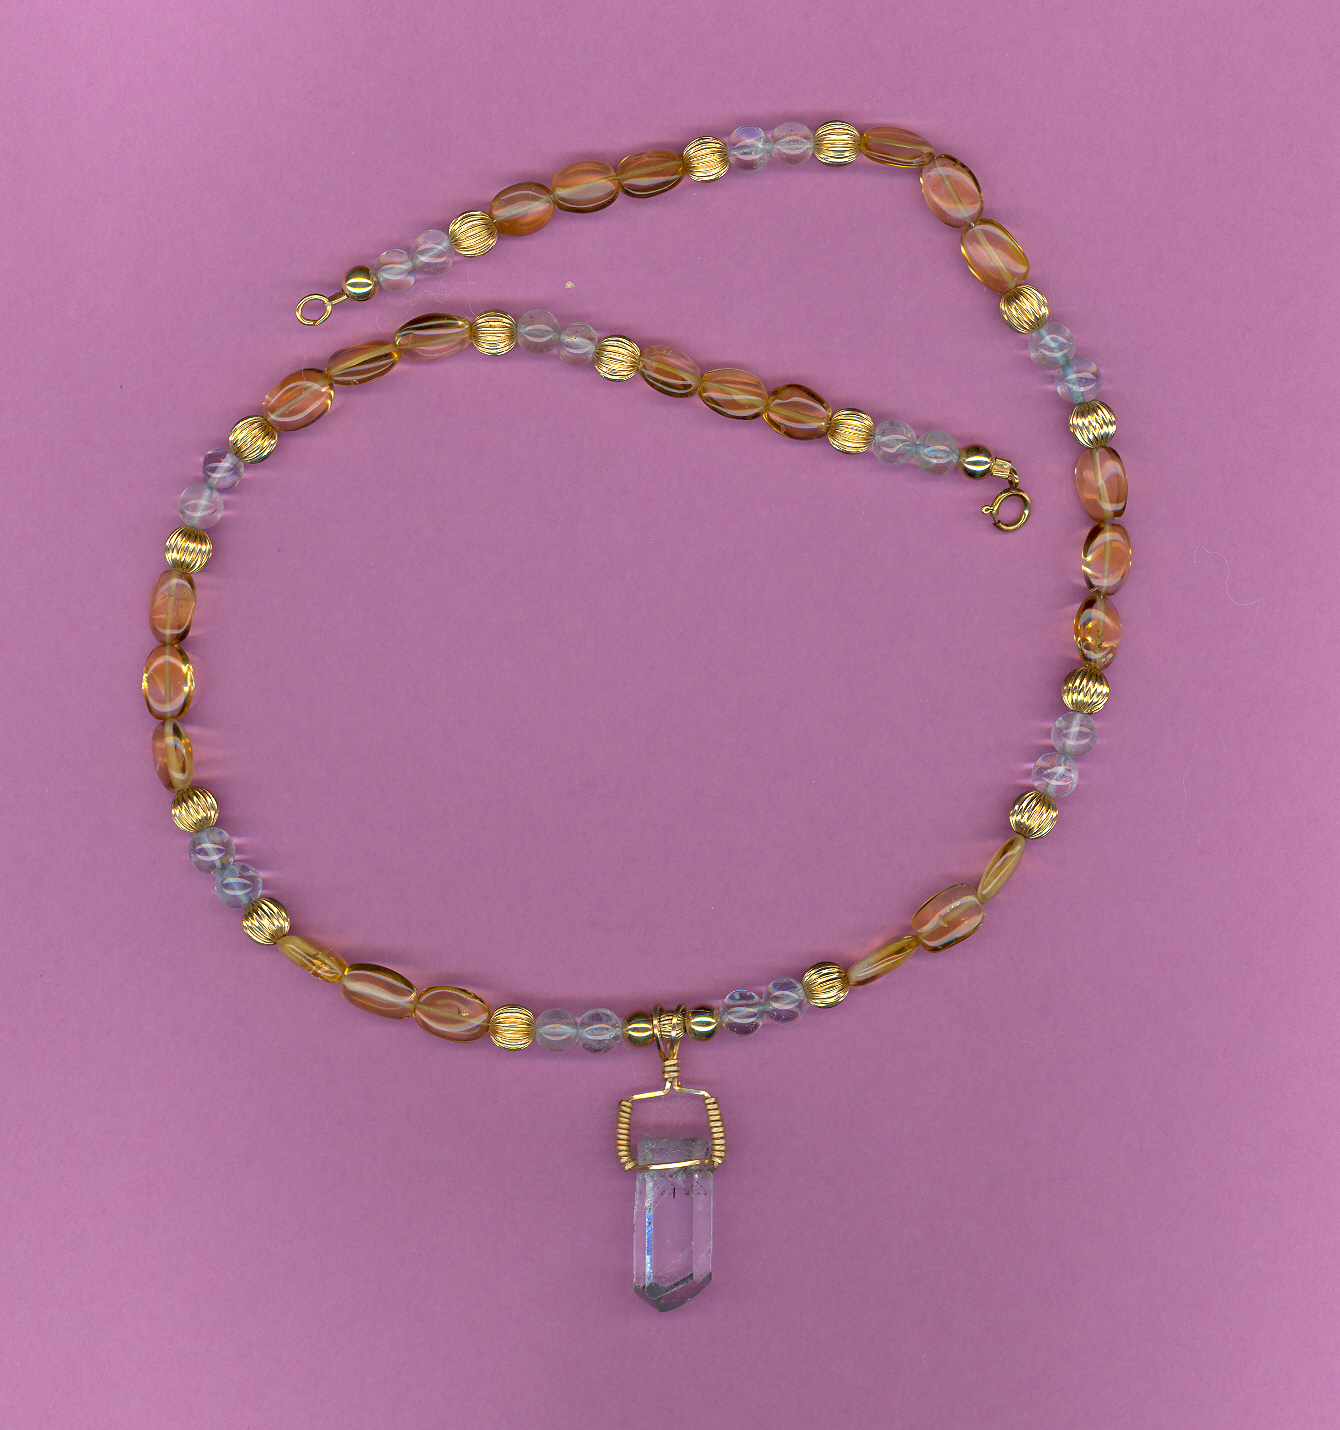 "Seer's Delight" 18" Necklace: Aquamarine, Citrine, Gold Fill Beads, & 12ct Aquamarine Pendant wrapped w/14kt